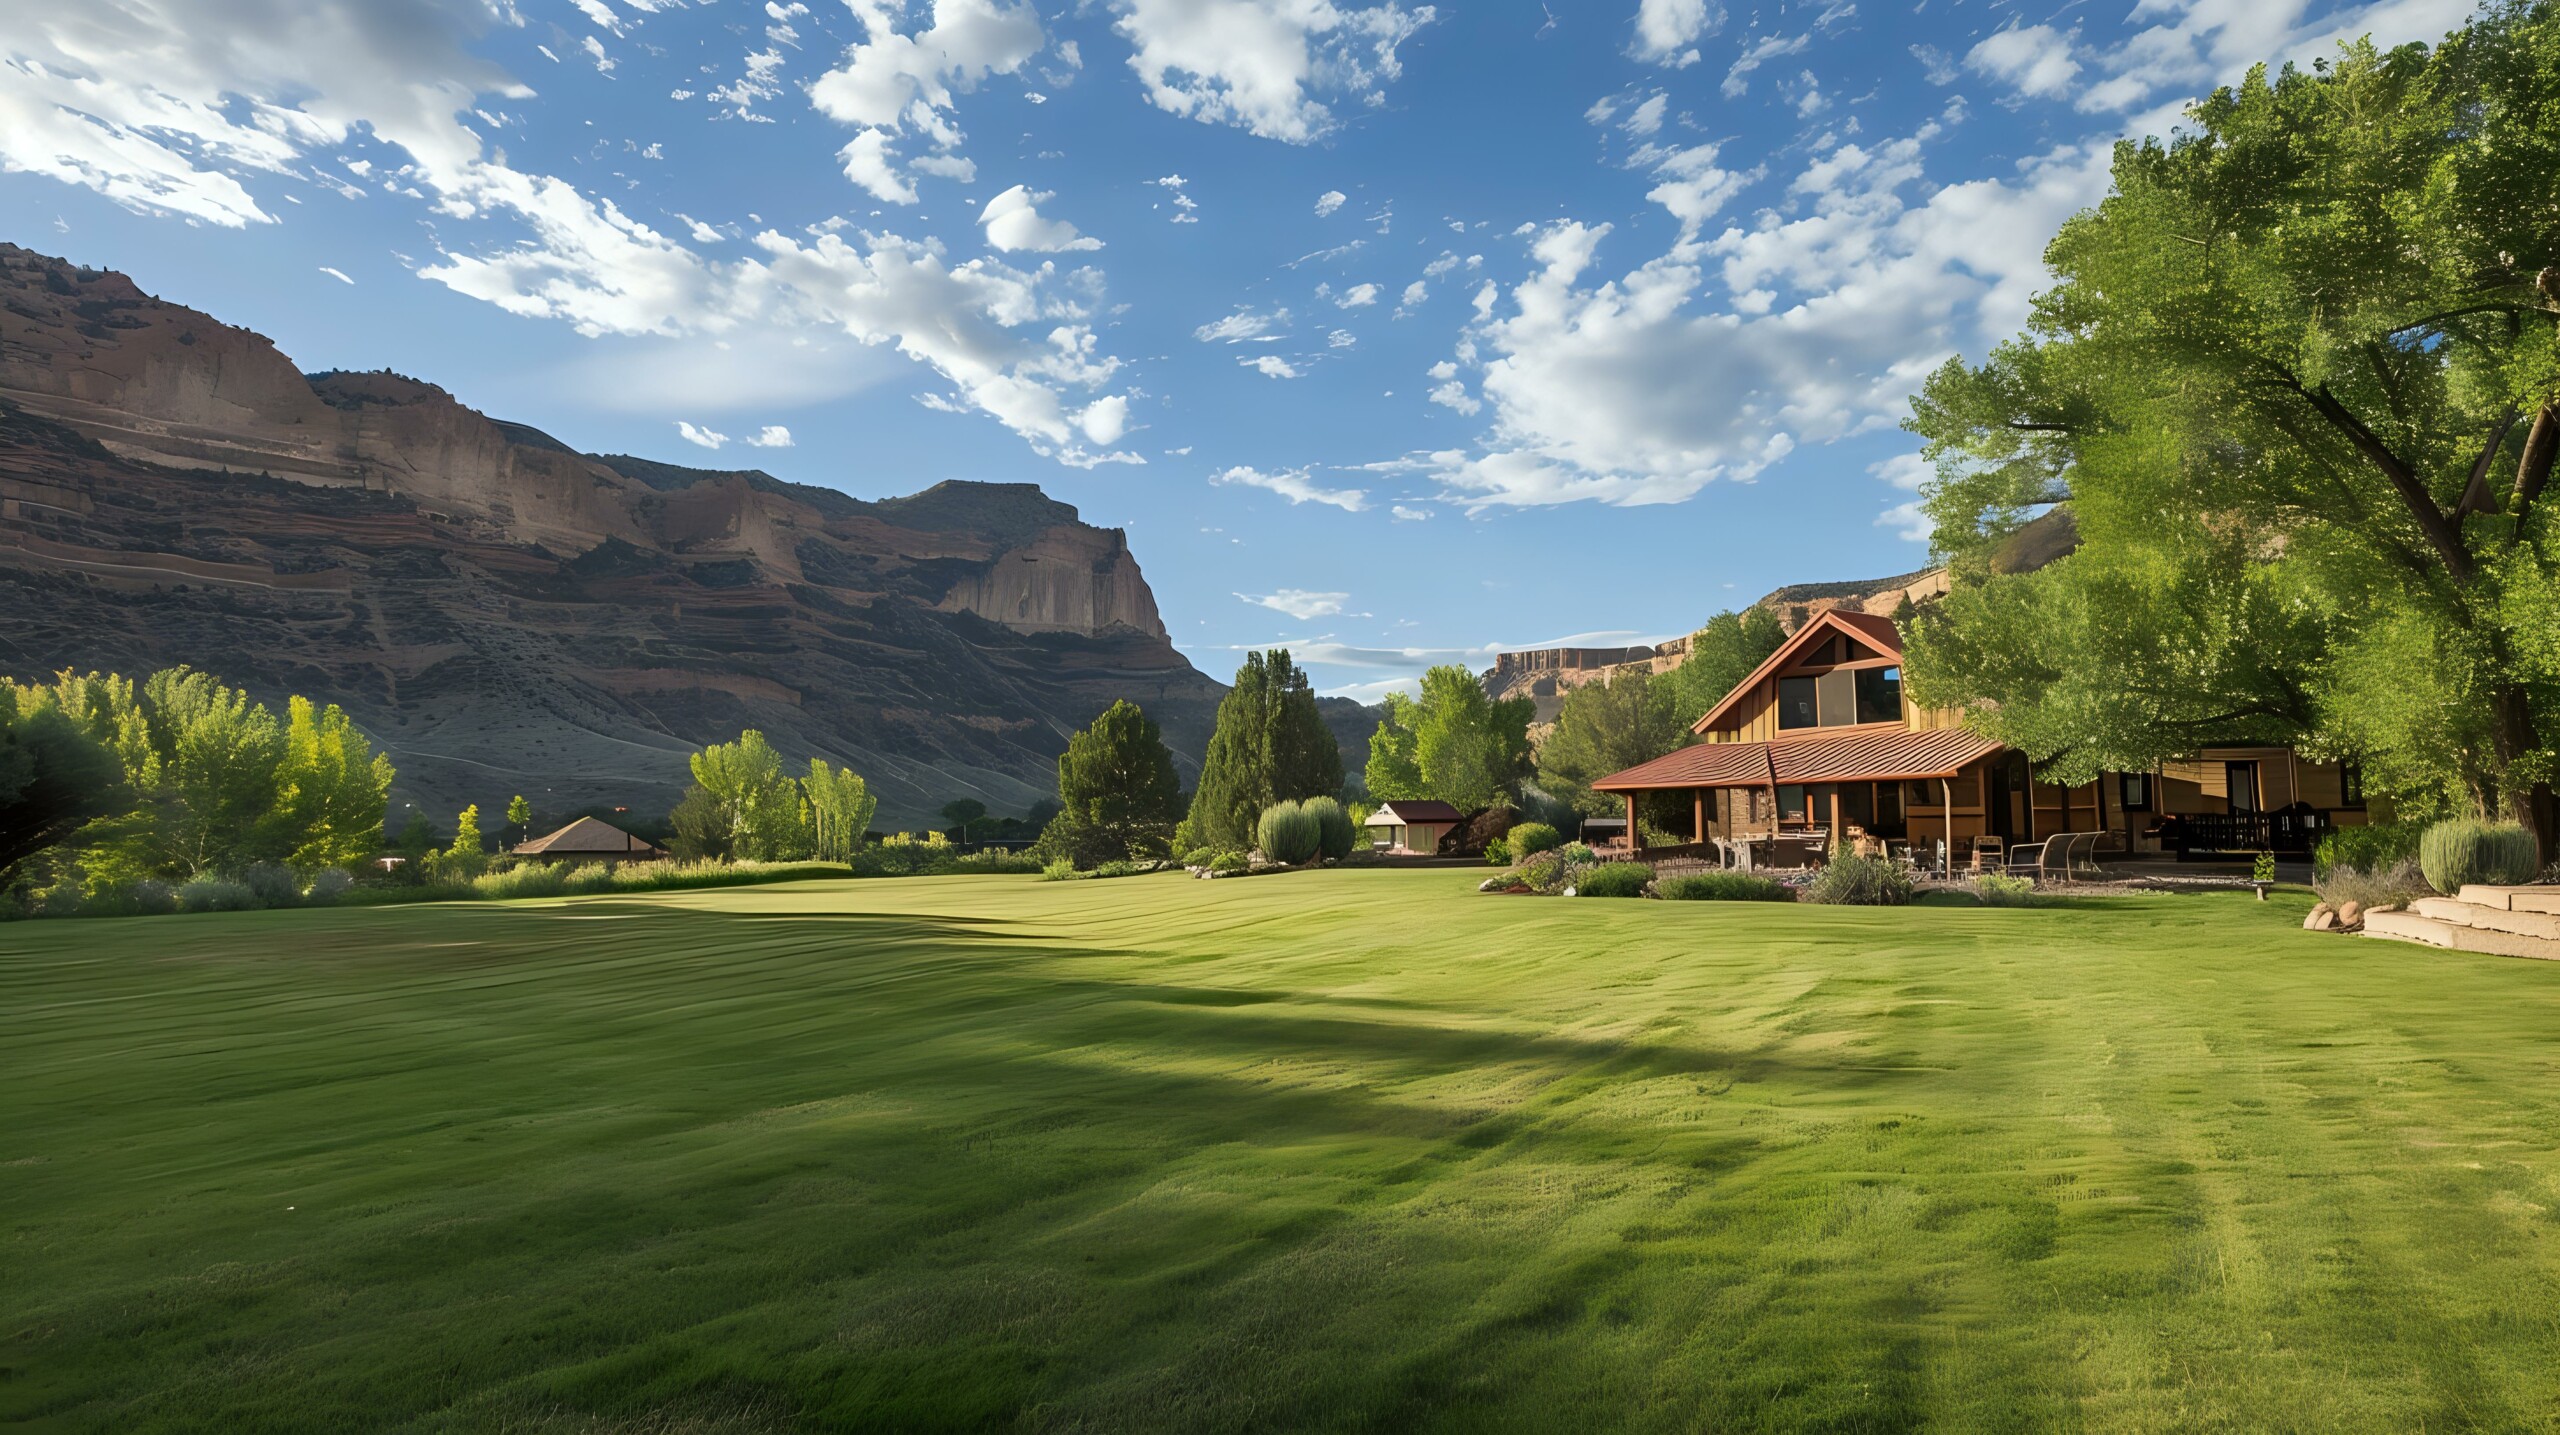 The Lawn of a $300k House in Western Colorado, Grand Junction